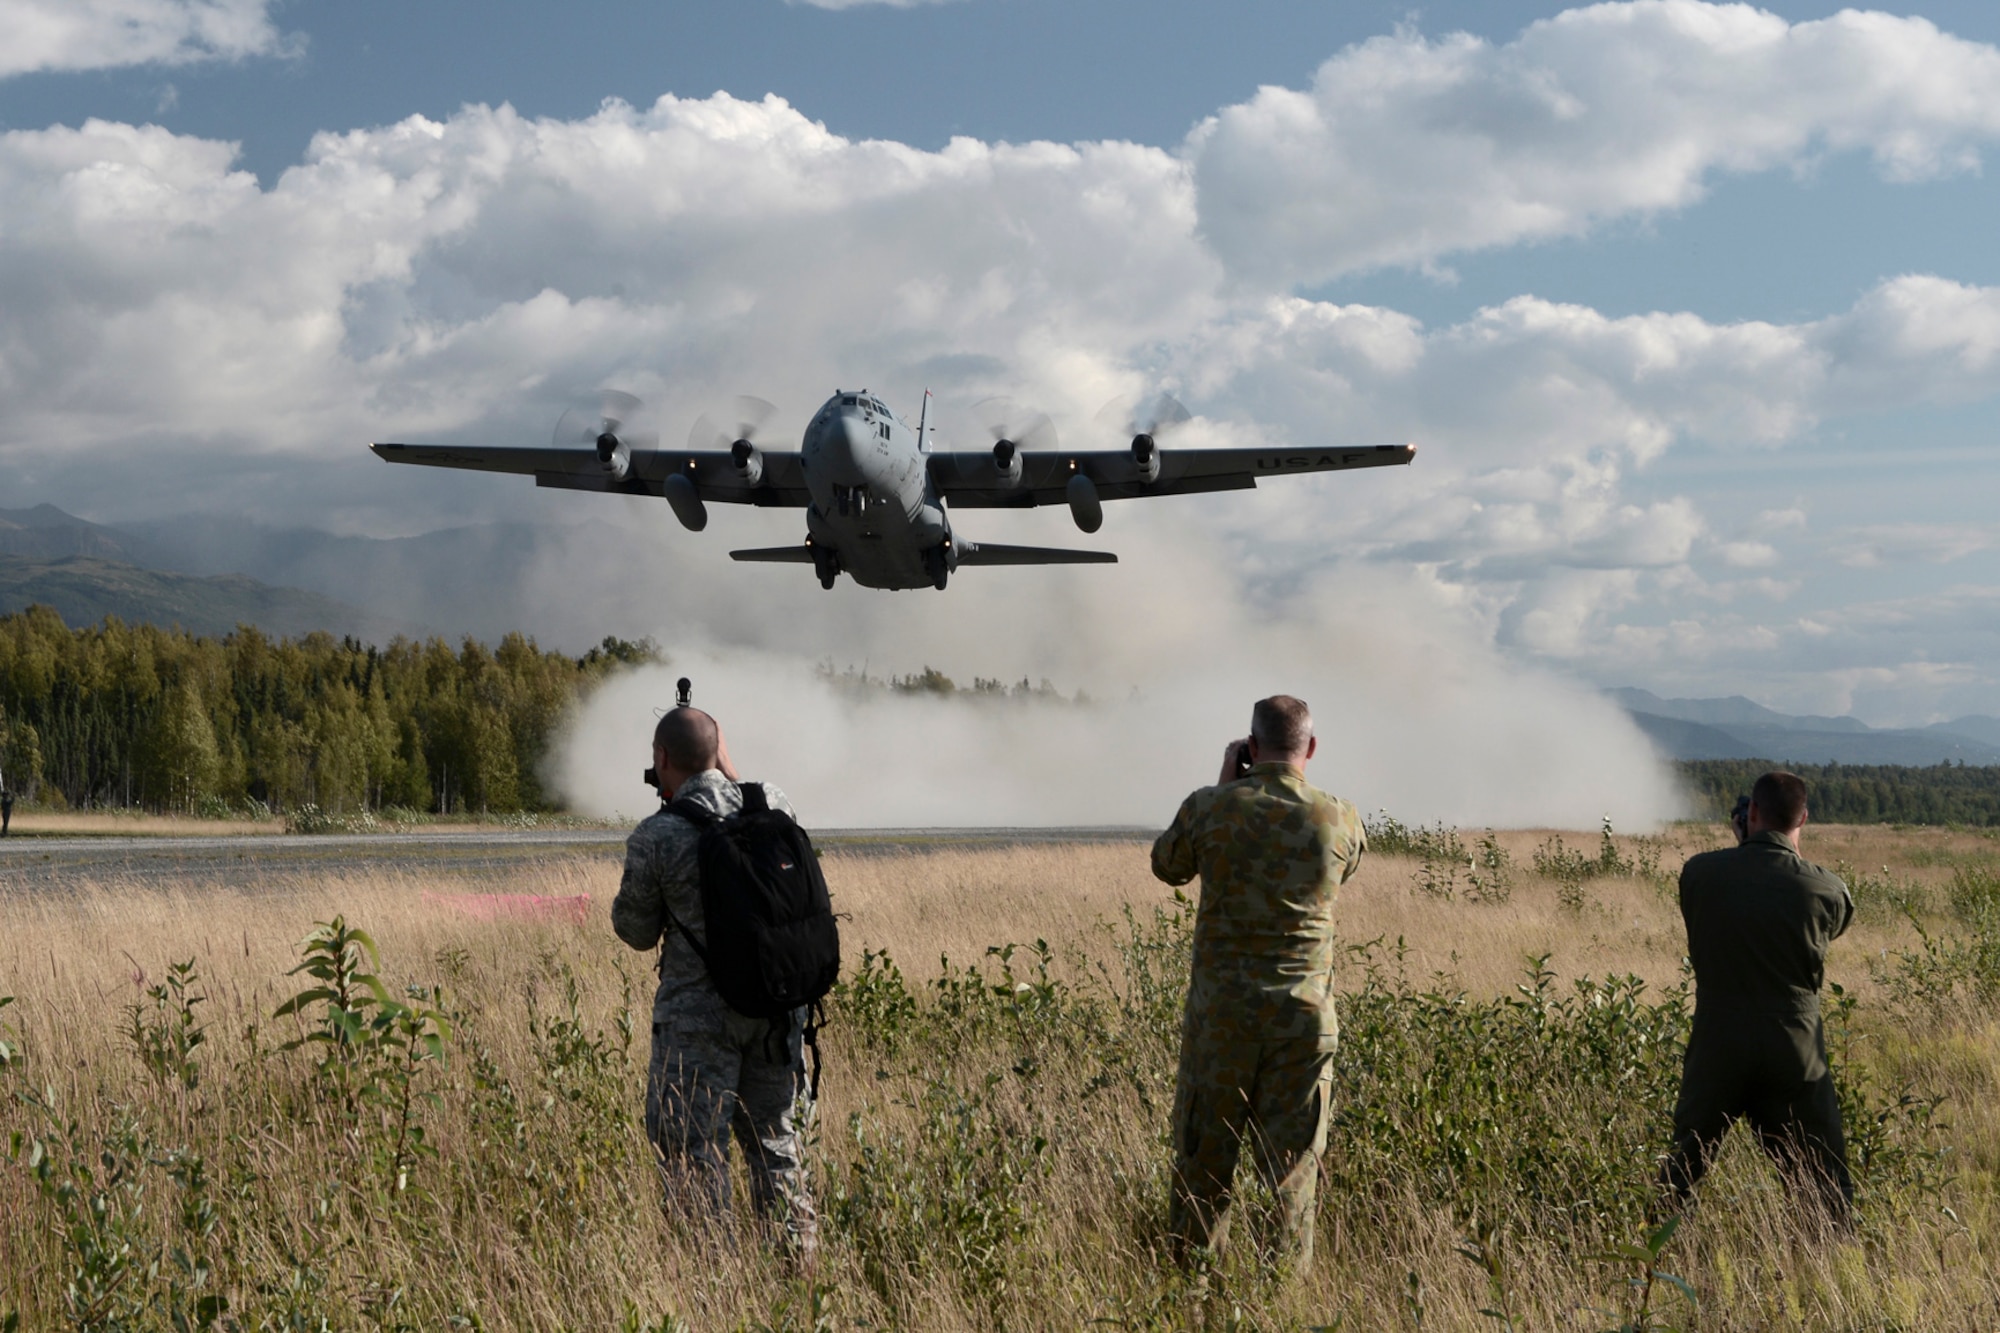 Observers watch a U.S. Air Force C-130 Hercules with the 36th Airlift Squadron from Yokota Air Base, Japan, take off of an austere runway used for training during RED FLAG-Alaska at Joint Base Elmendorf-Richardson, Alaska, Aug. 14, 2015. The training allowed C-130 aircrew to practice austere landings and take offs, combat offloads and supply drops, but also allowed friendly competition between participating Air Forces: U.S. Air Force, Japan Air Self-Defense Force, Royal Air Force, Royal Australian Air Force, Royal New Zealand Air Force and Royal Thai Air Force. Seasoned C-130 aircrew from each country judged the training exercises from the ground, allotting points based off predetermined timing and accuracy requirements. (U.S. Air Force photo by Staff Sgt. Cody H. Ramirez/Released)